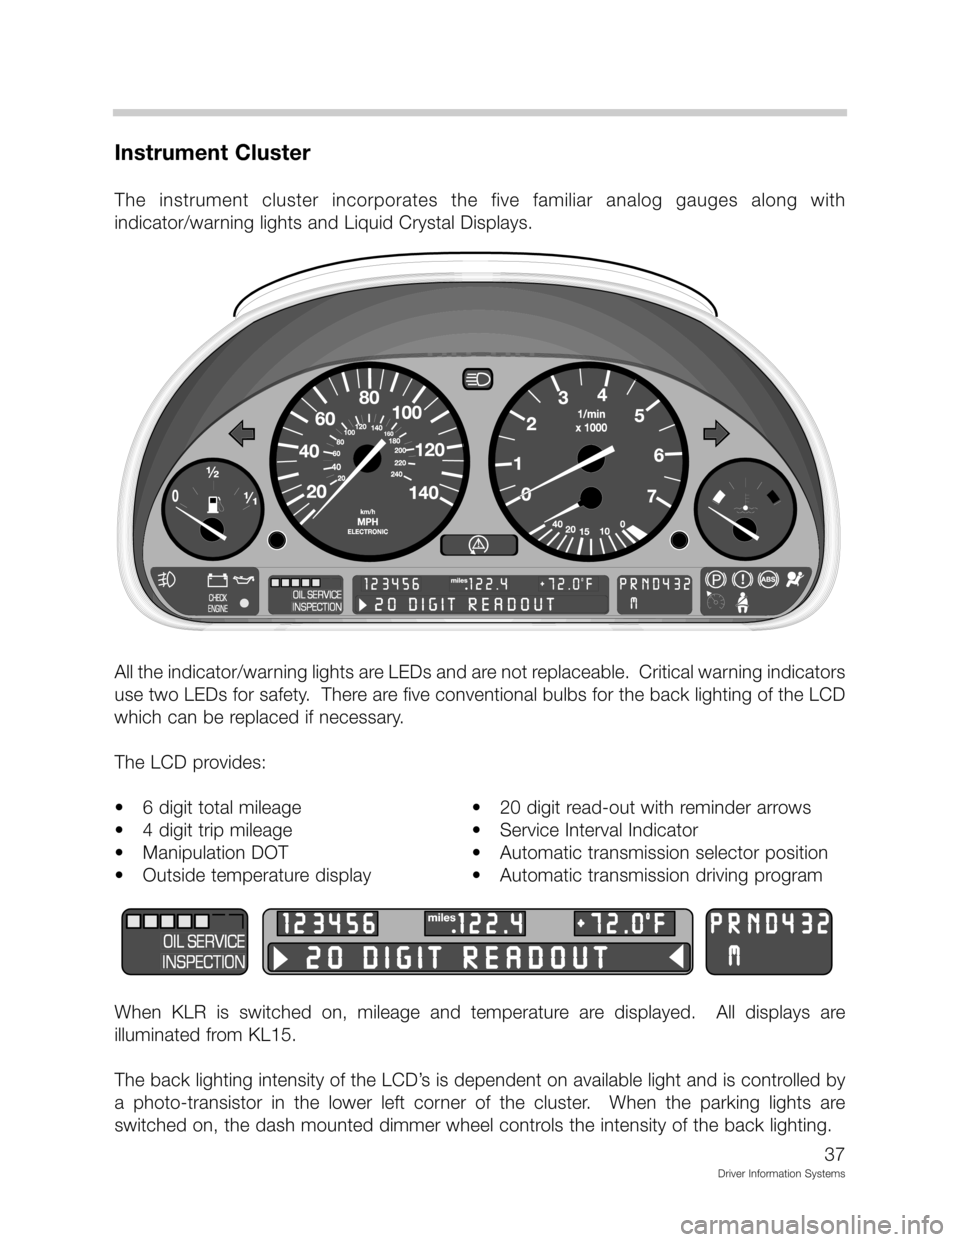 BMW Z3 ROADSTER 2000 E36 Driver Information Systems Manual 
		
 	
 
	   ;2 ;

 
 	 
 :
!":
!1D	!


-

!":
1